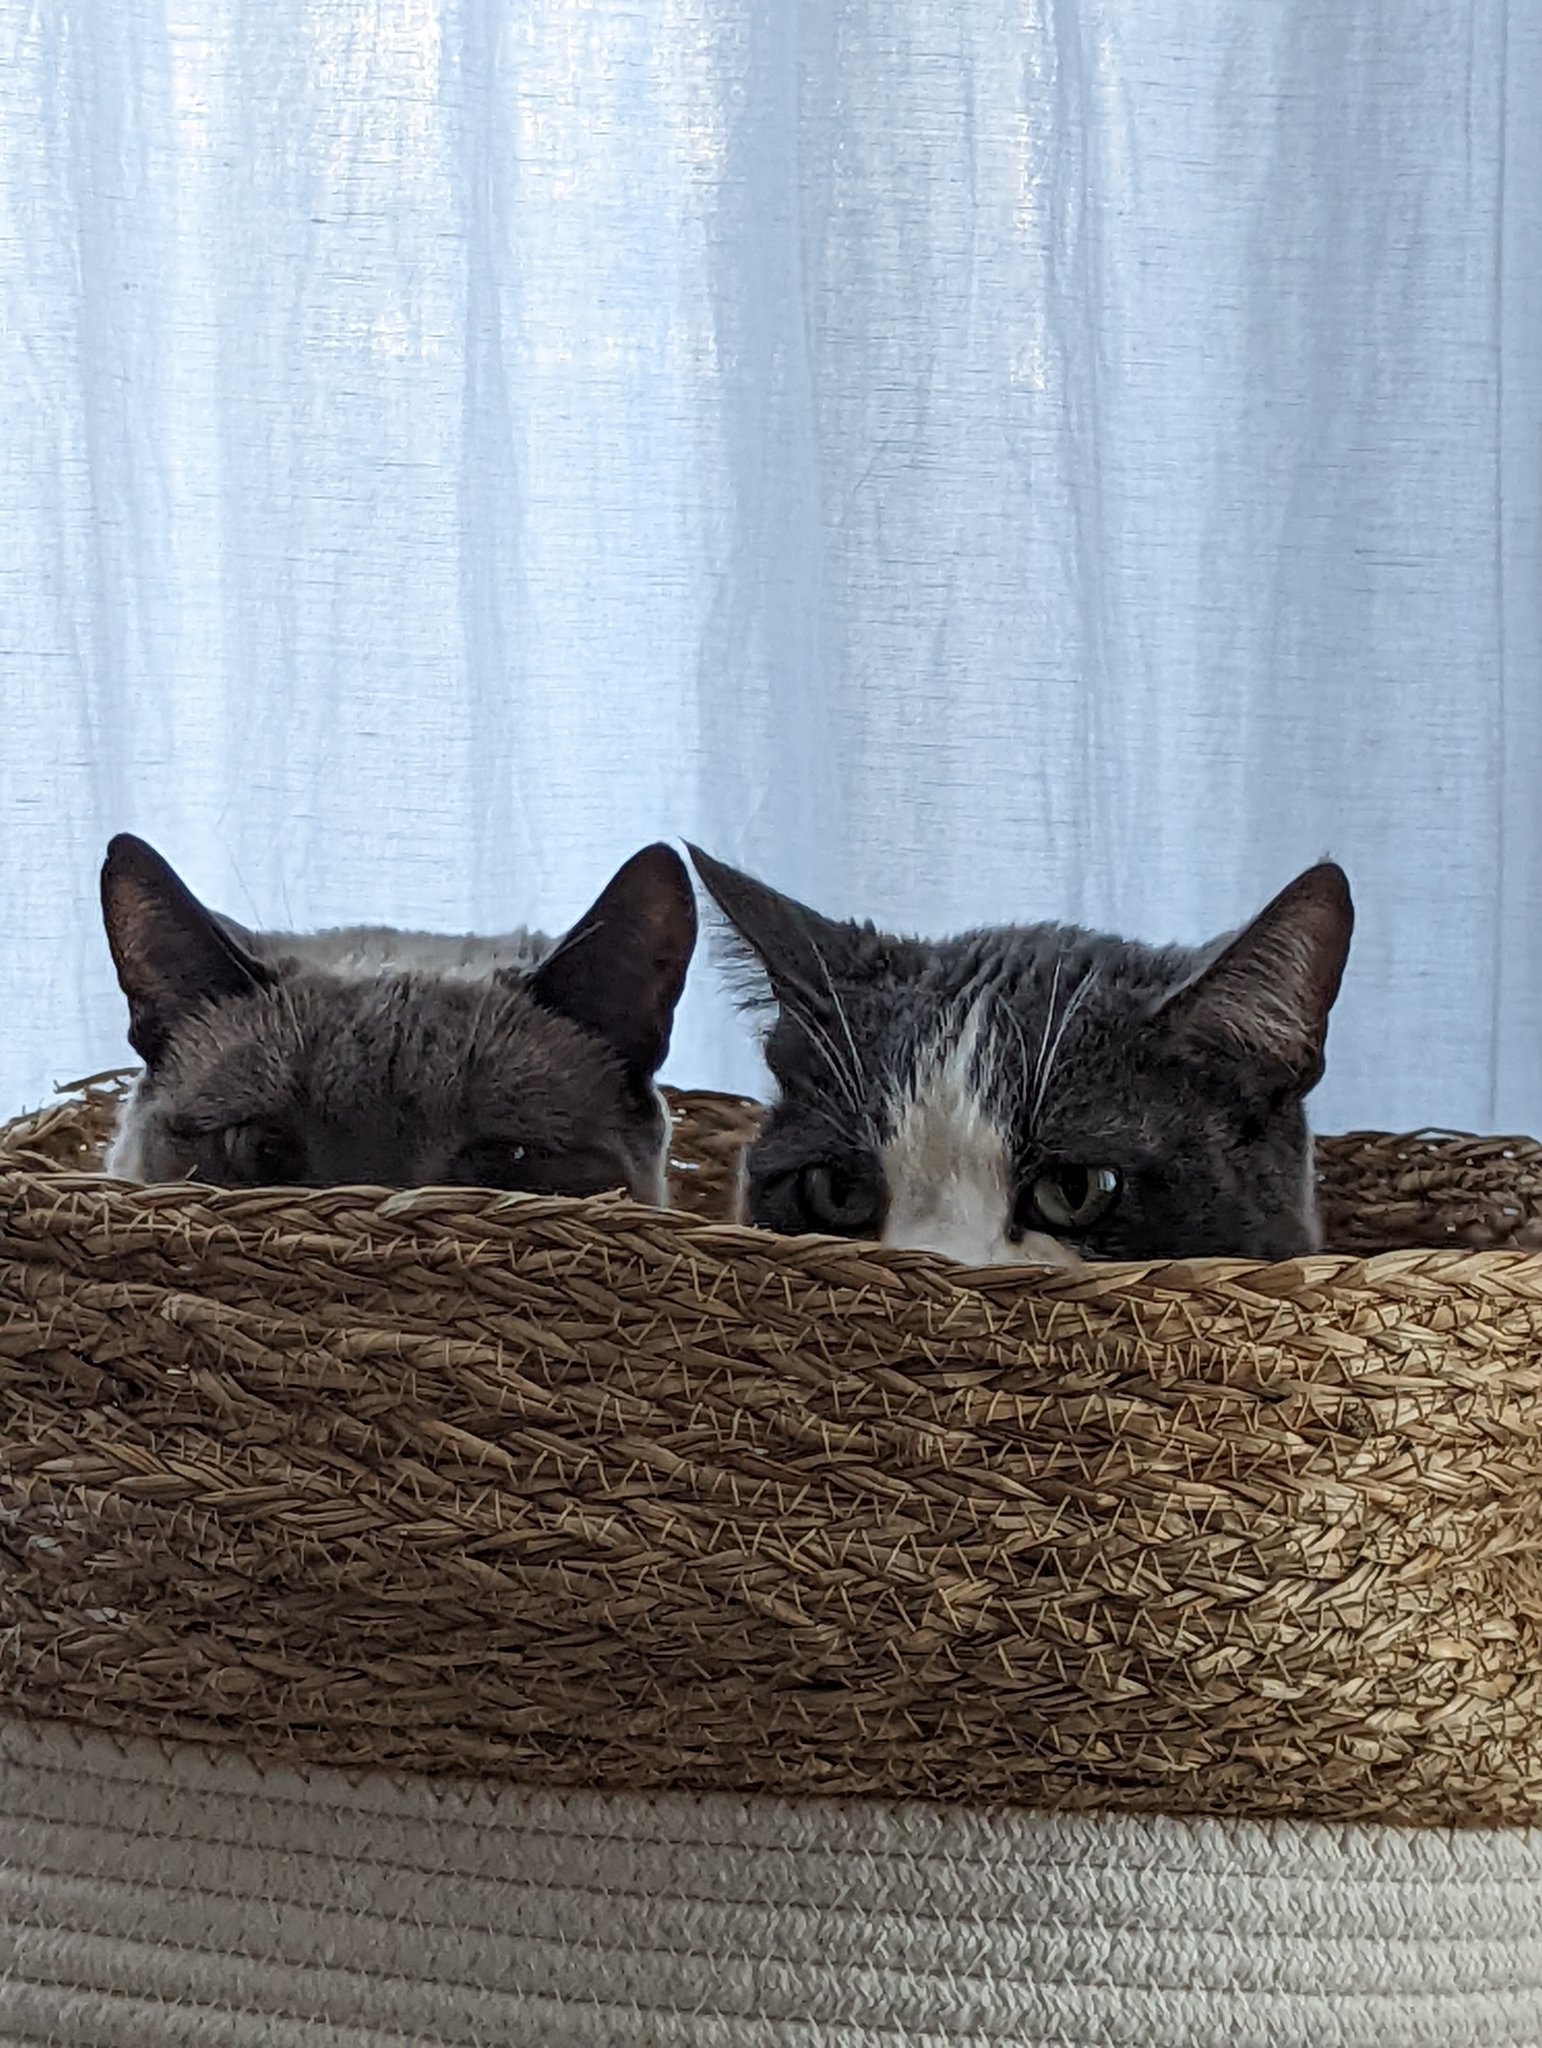 two gray cats sitting in a basket so only their eyes and ears are visible